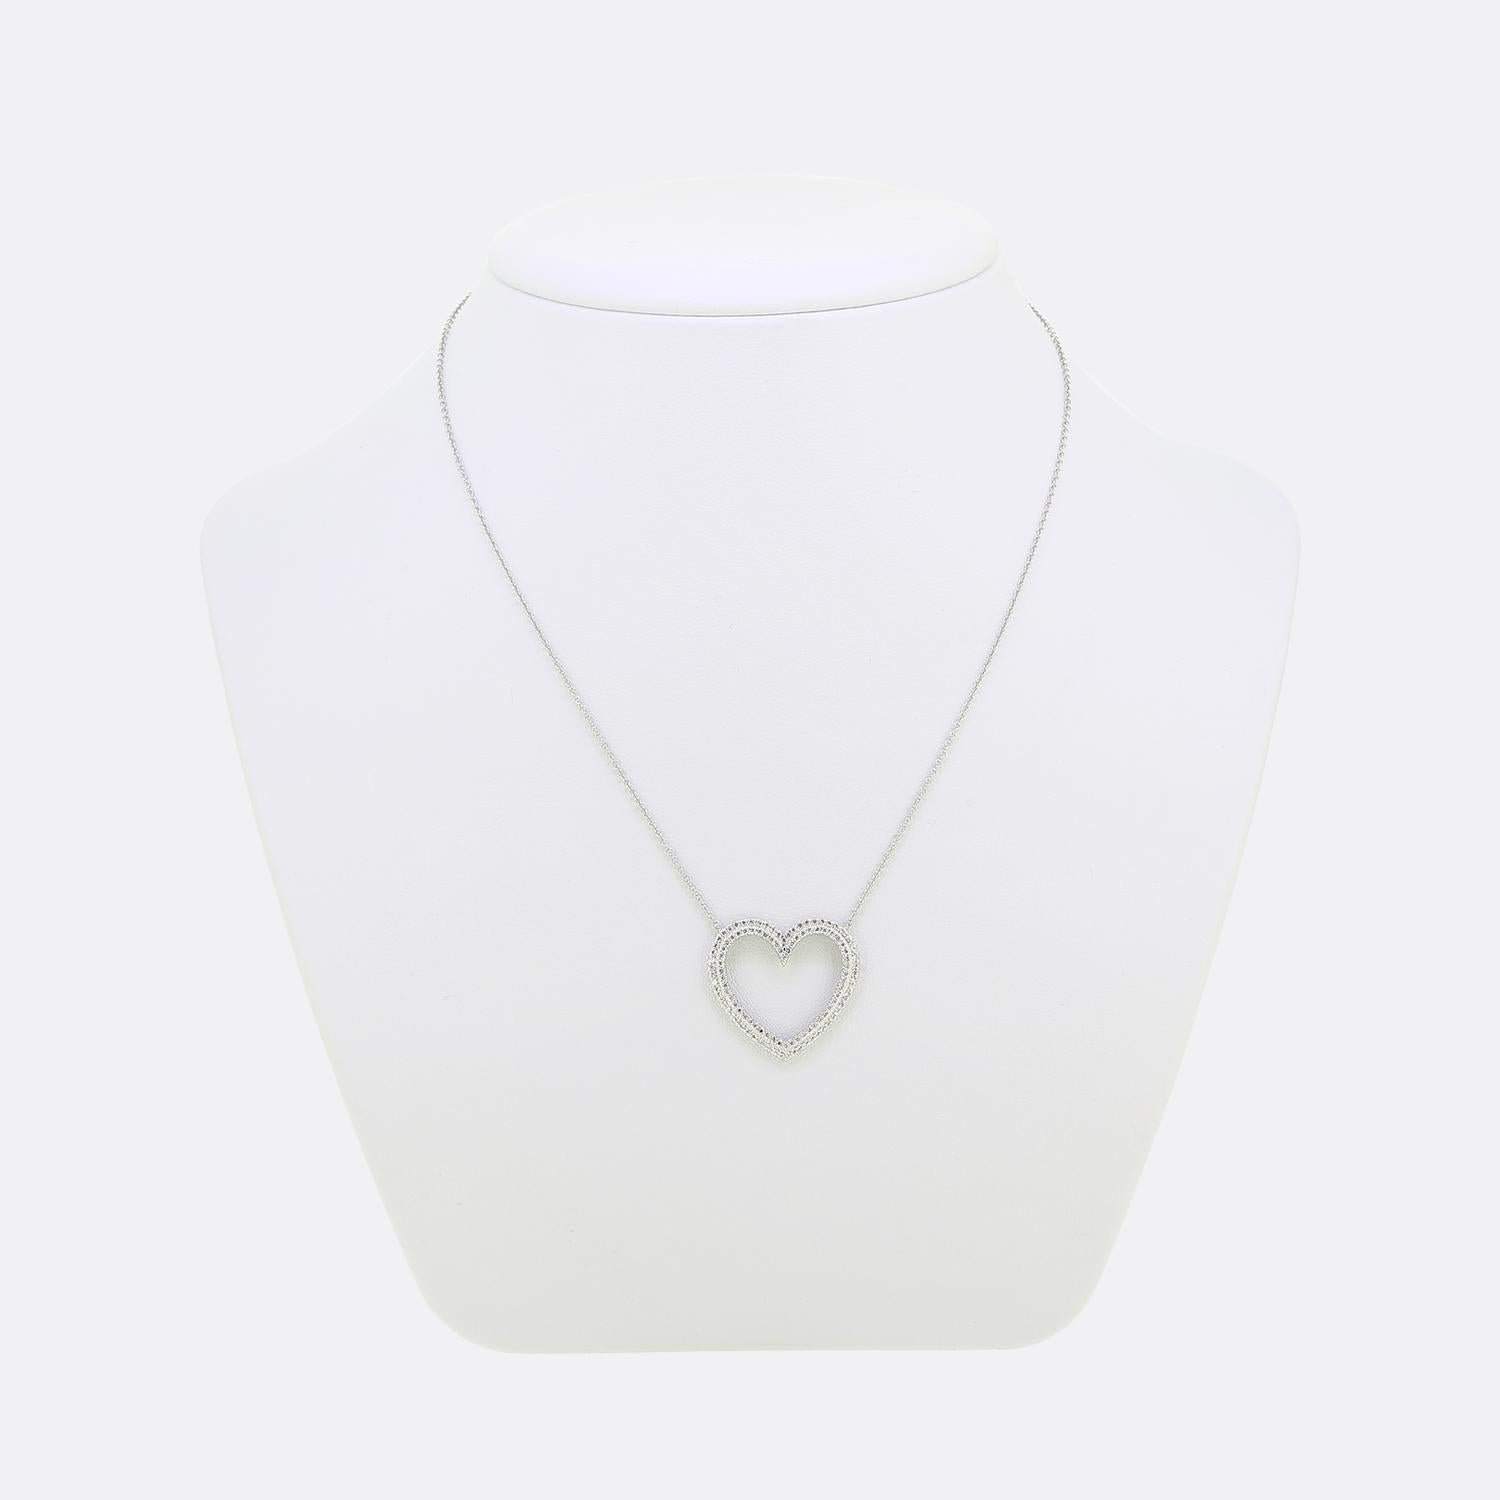 Here we have a wonderful necklace from the world renowned luxury jewellery designer Tiffany & Co. This necklace has been crafted from platinum with the pendant showcasing an open heart design adorned with two layers of round brilliant cut diamonds